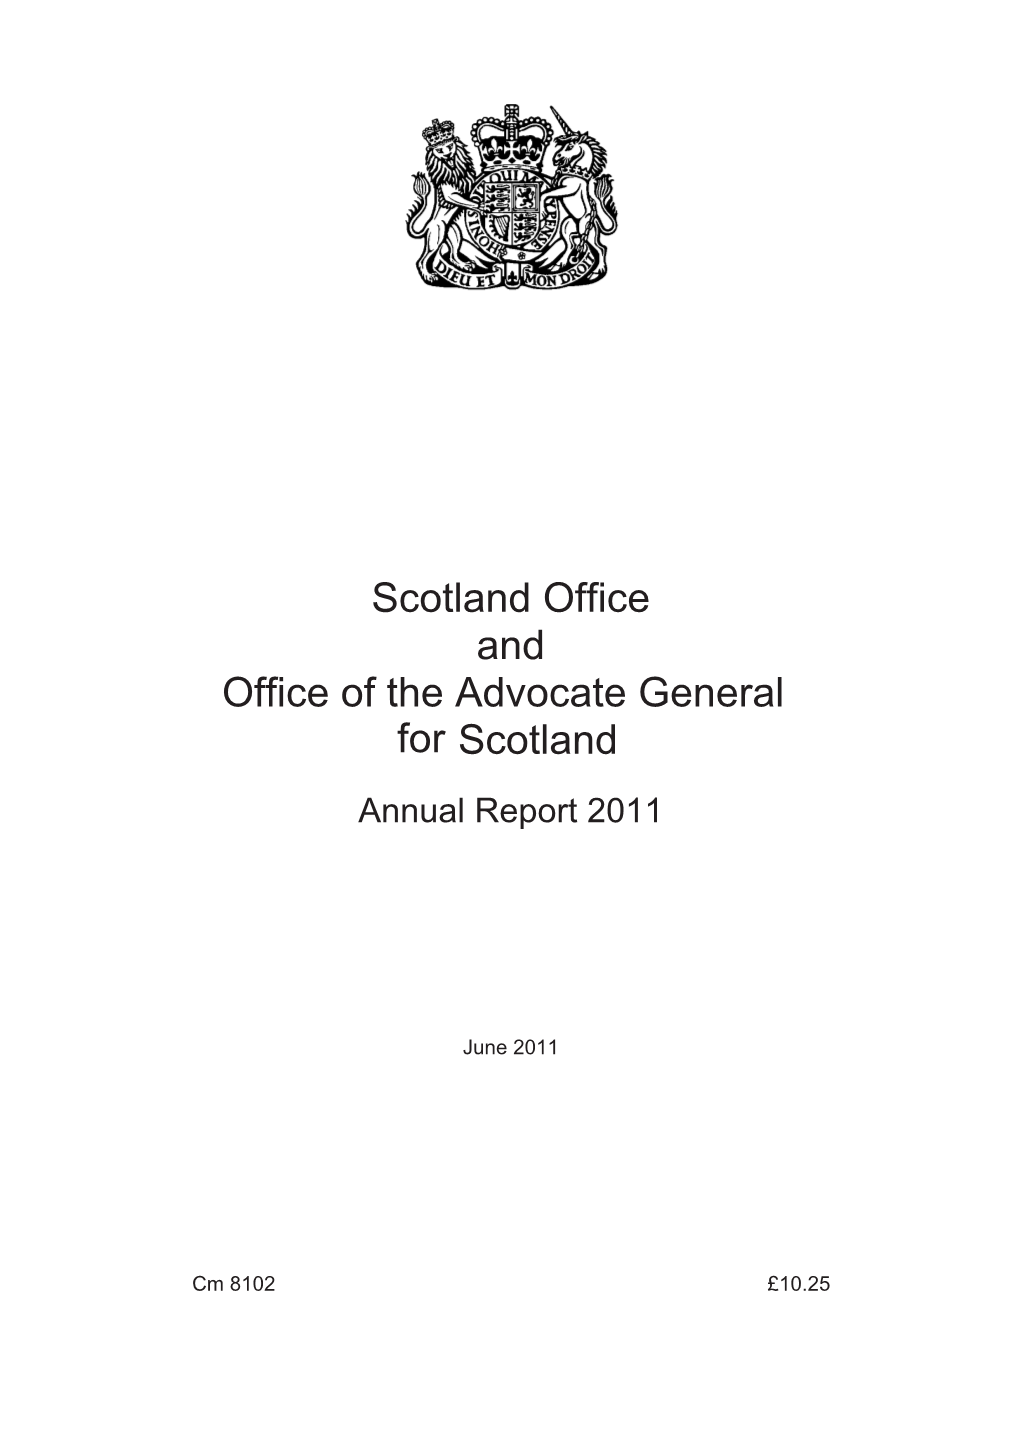 Scotland Office and Office of the Advocate General for Scotland